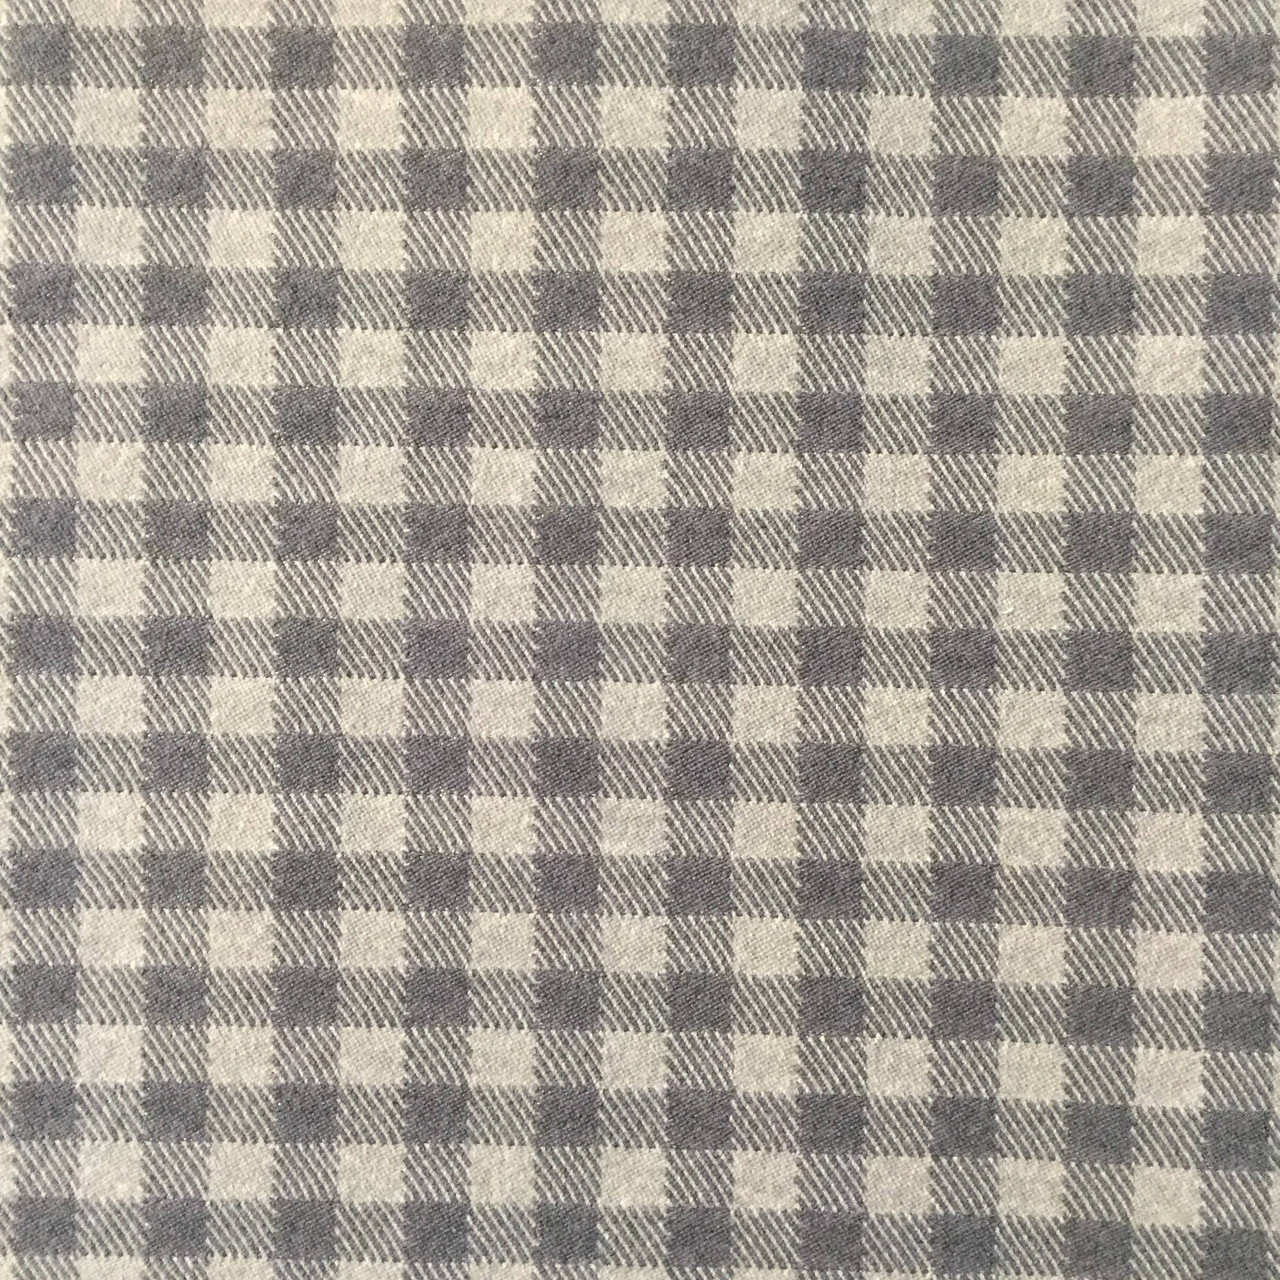 Flannel Grey Silver Plaid Woven Patterns Upholstery Fabric by The Yard